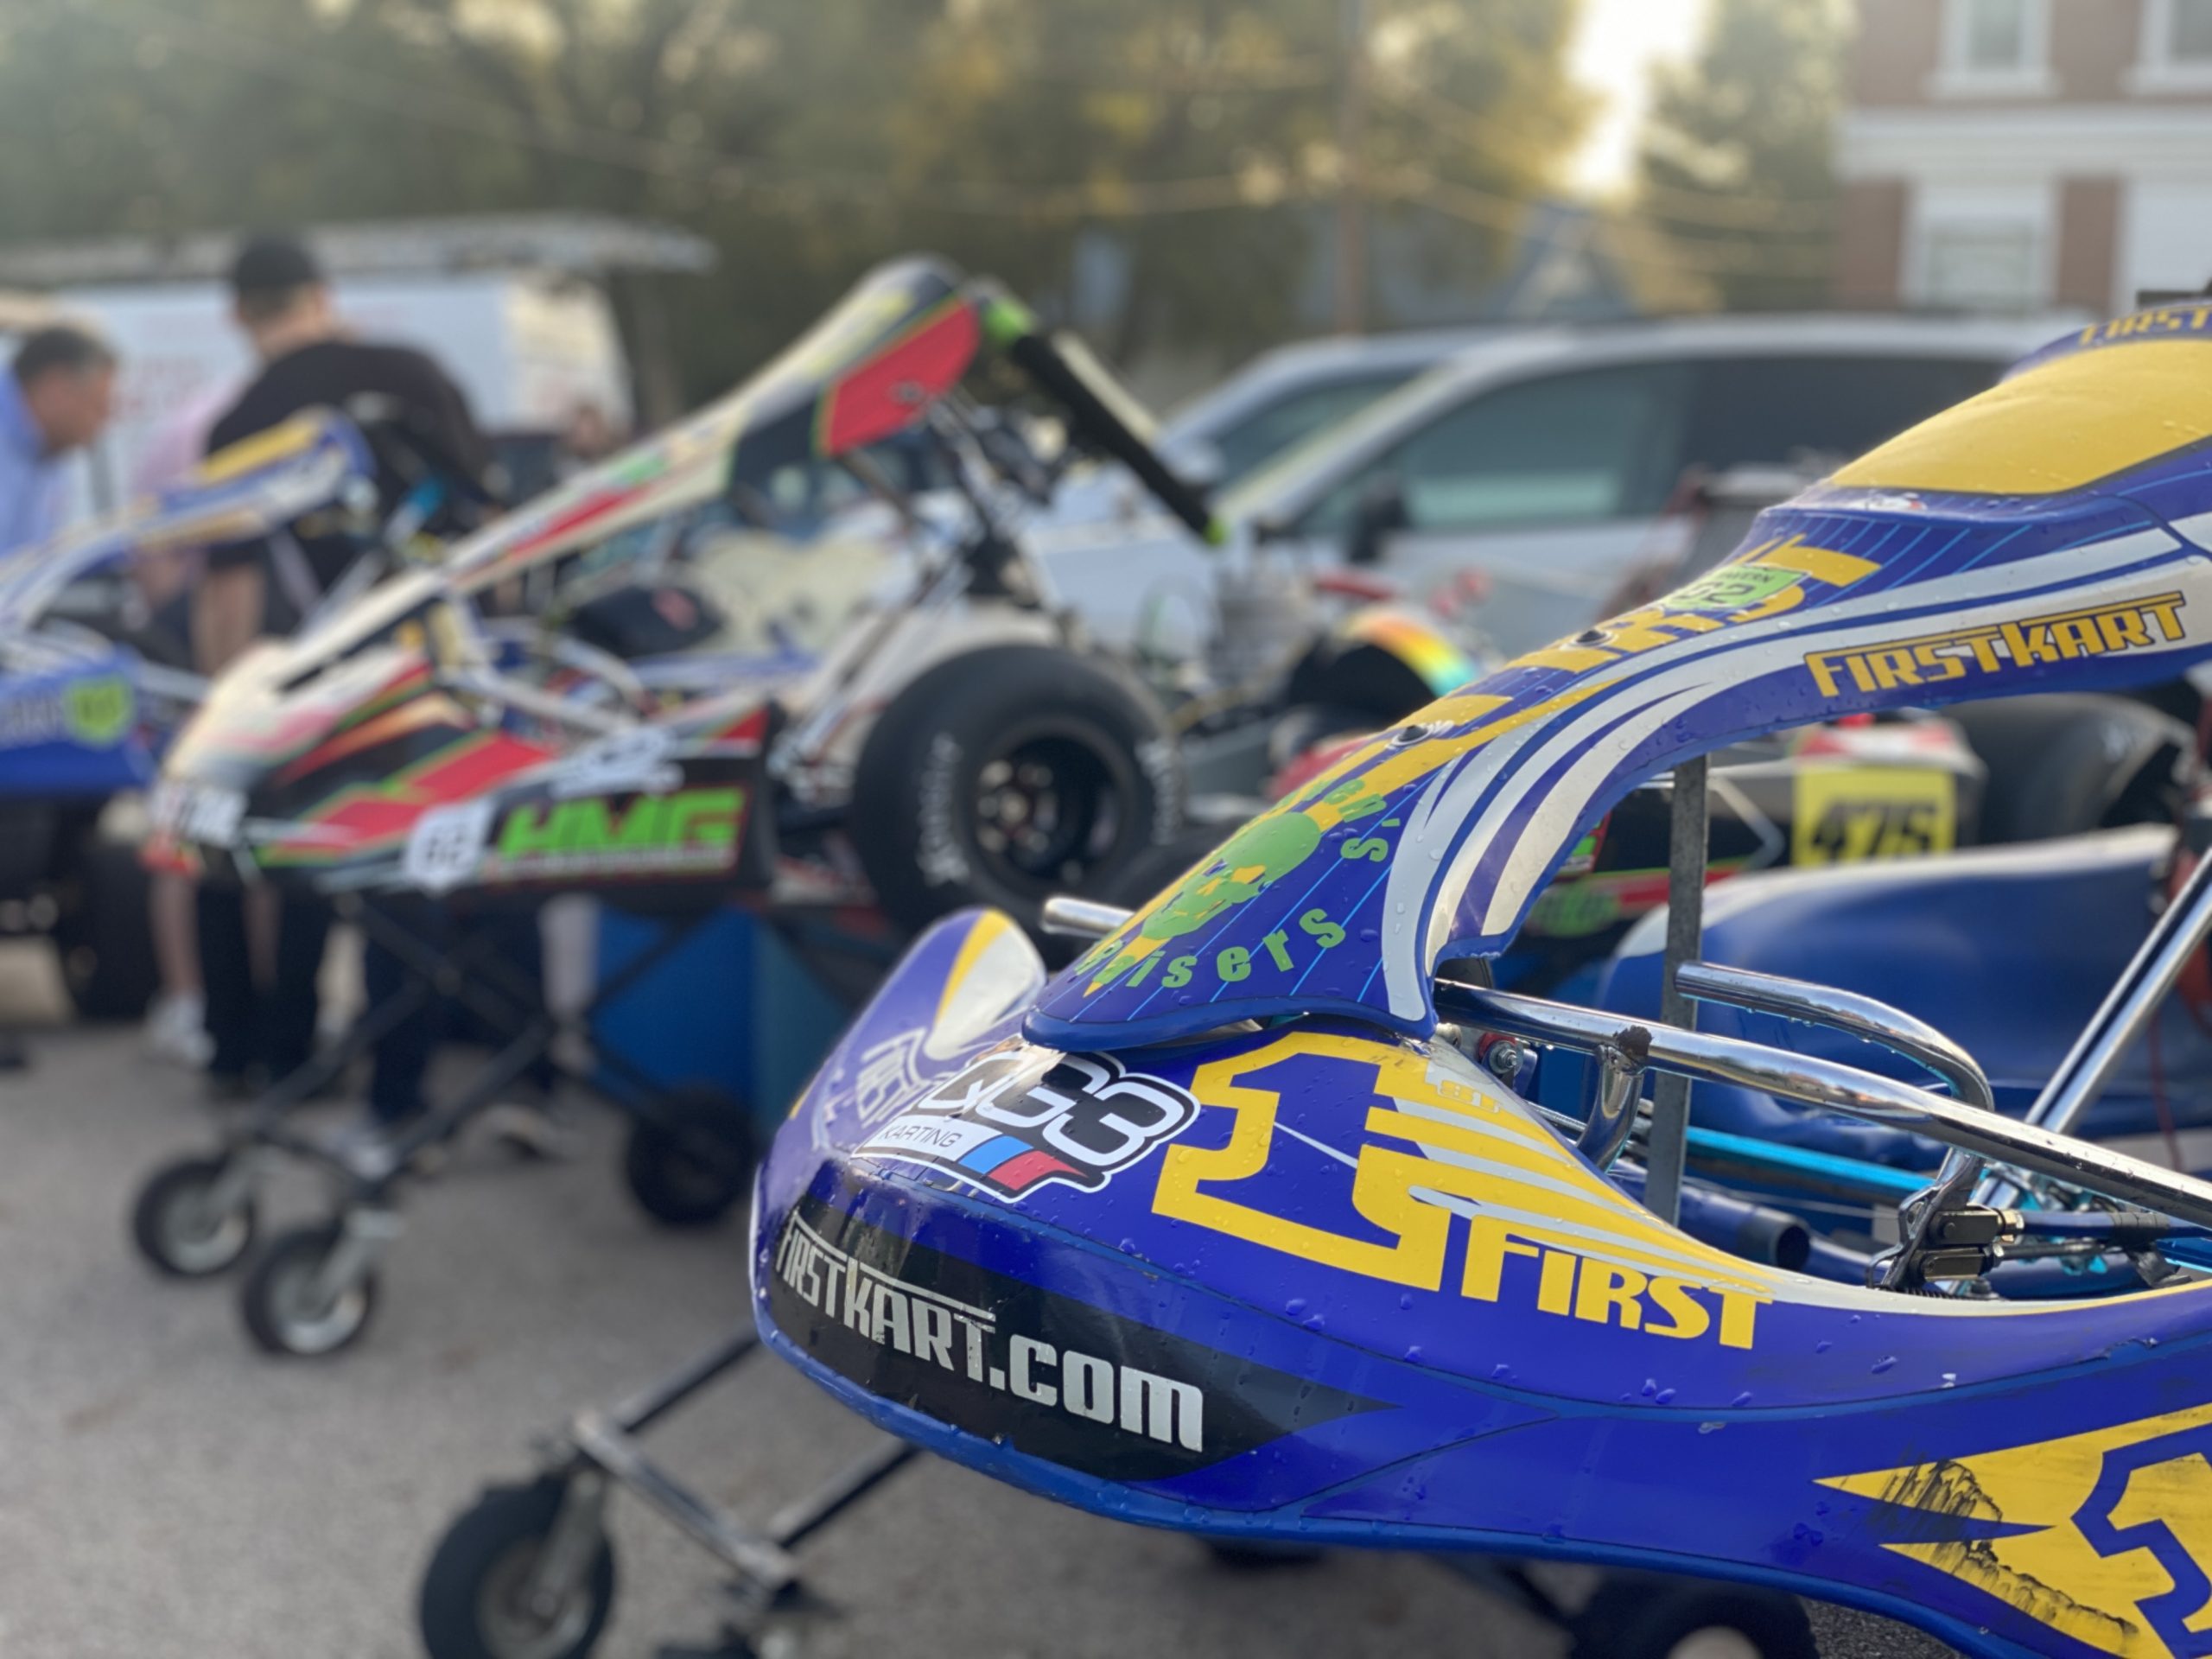  Commercial Point Karting Classic Kicks off First Week in August 